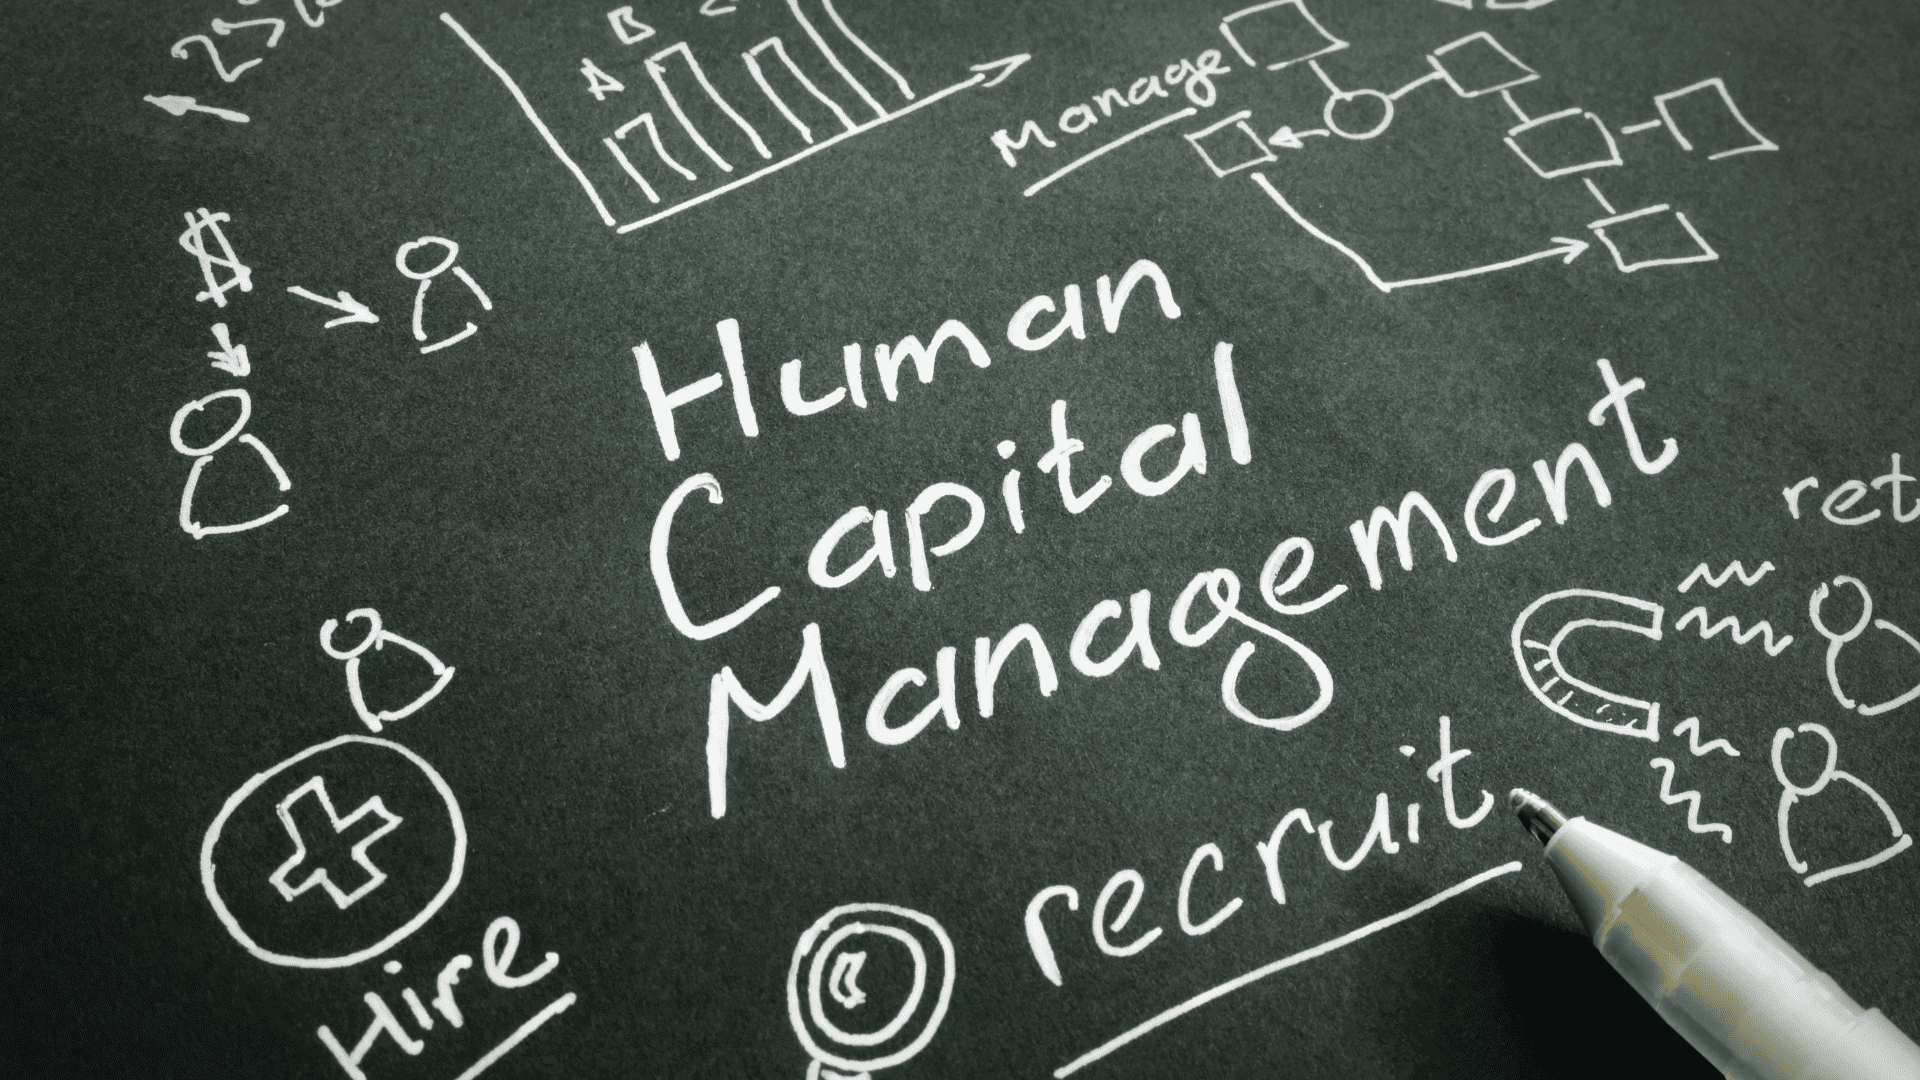 human capital management is supply chain management